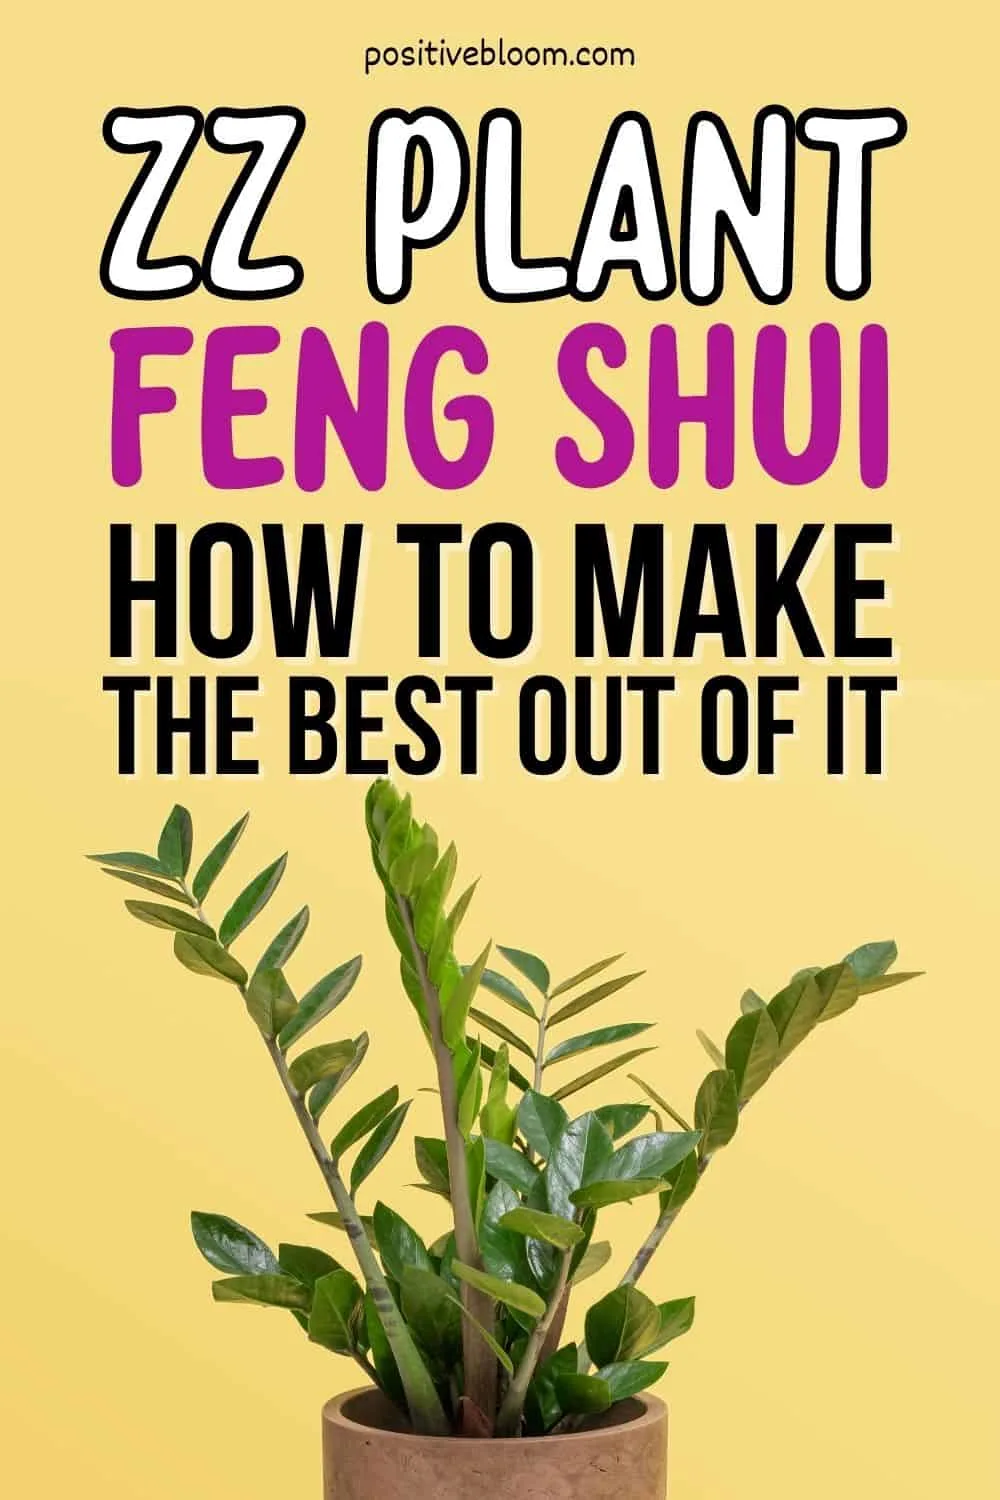 ZZ Plant Feng Shui How To Make The Best Out Of It Pinterest